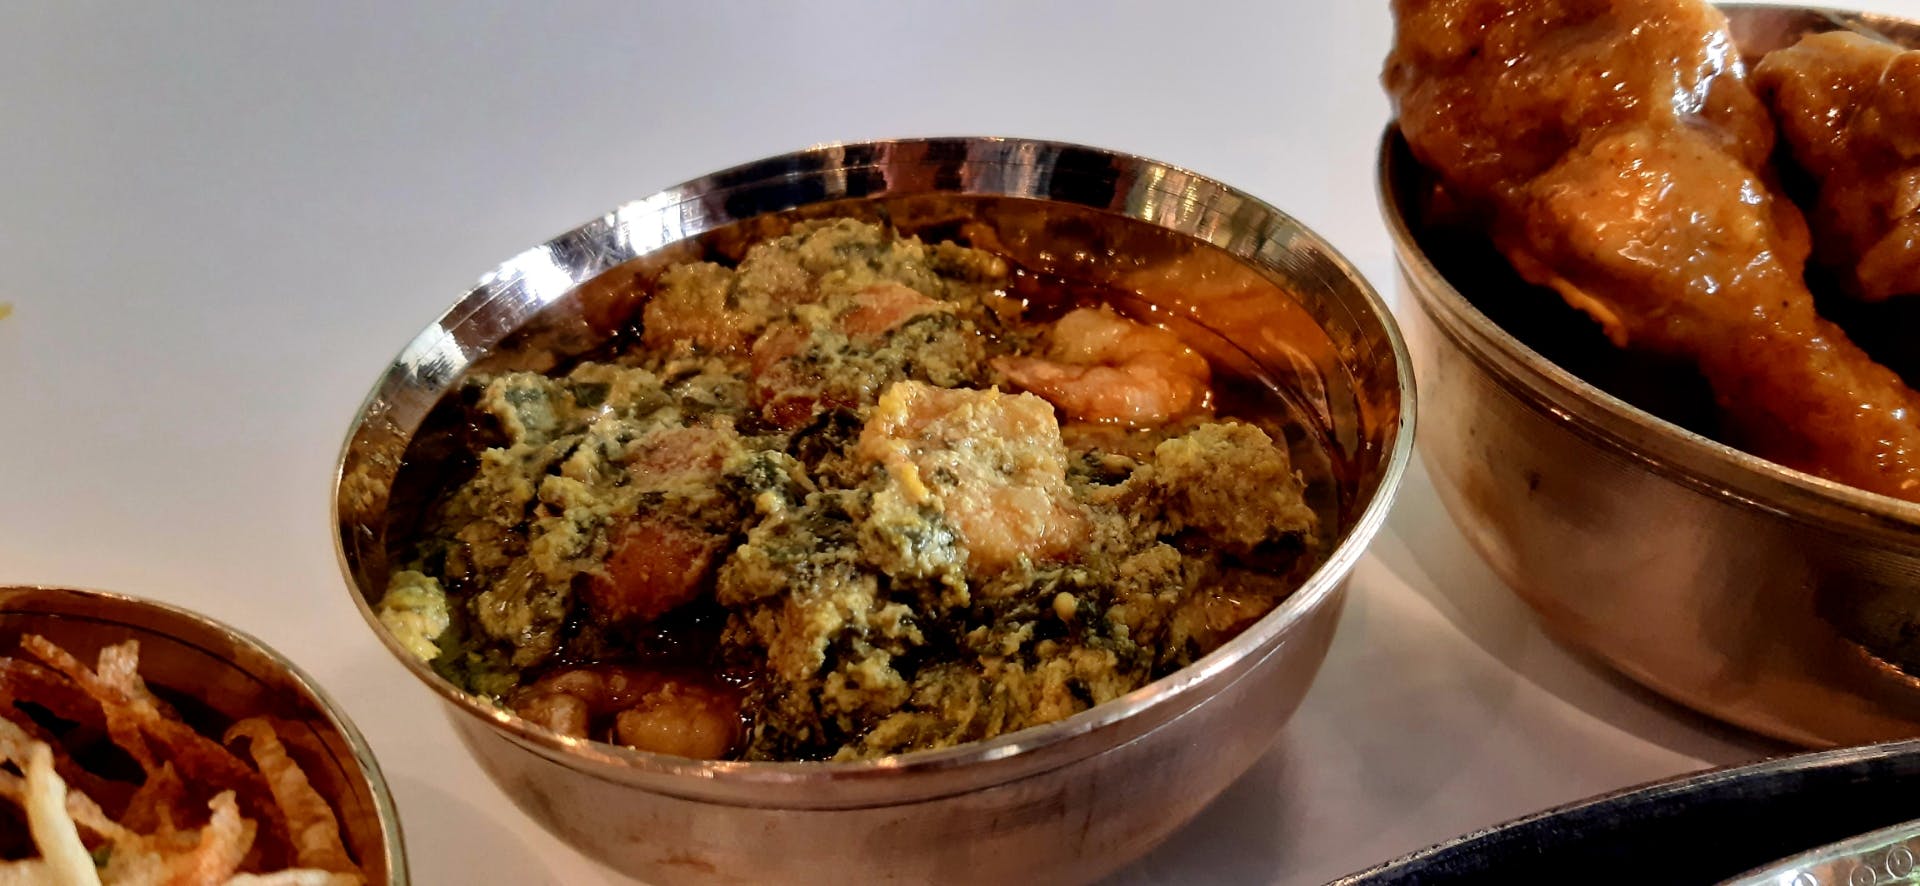 Dish,Food,Cuisine,Ingredient,Meat,Produce,Recipe,Gosht,Stuffing,Curry